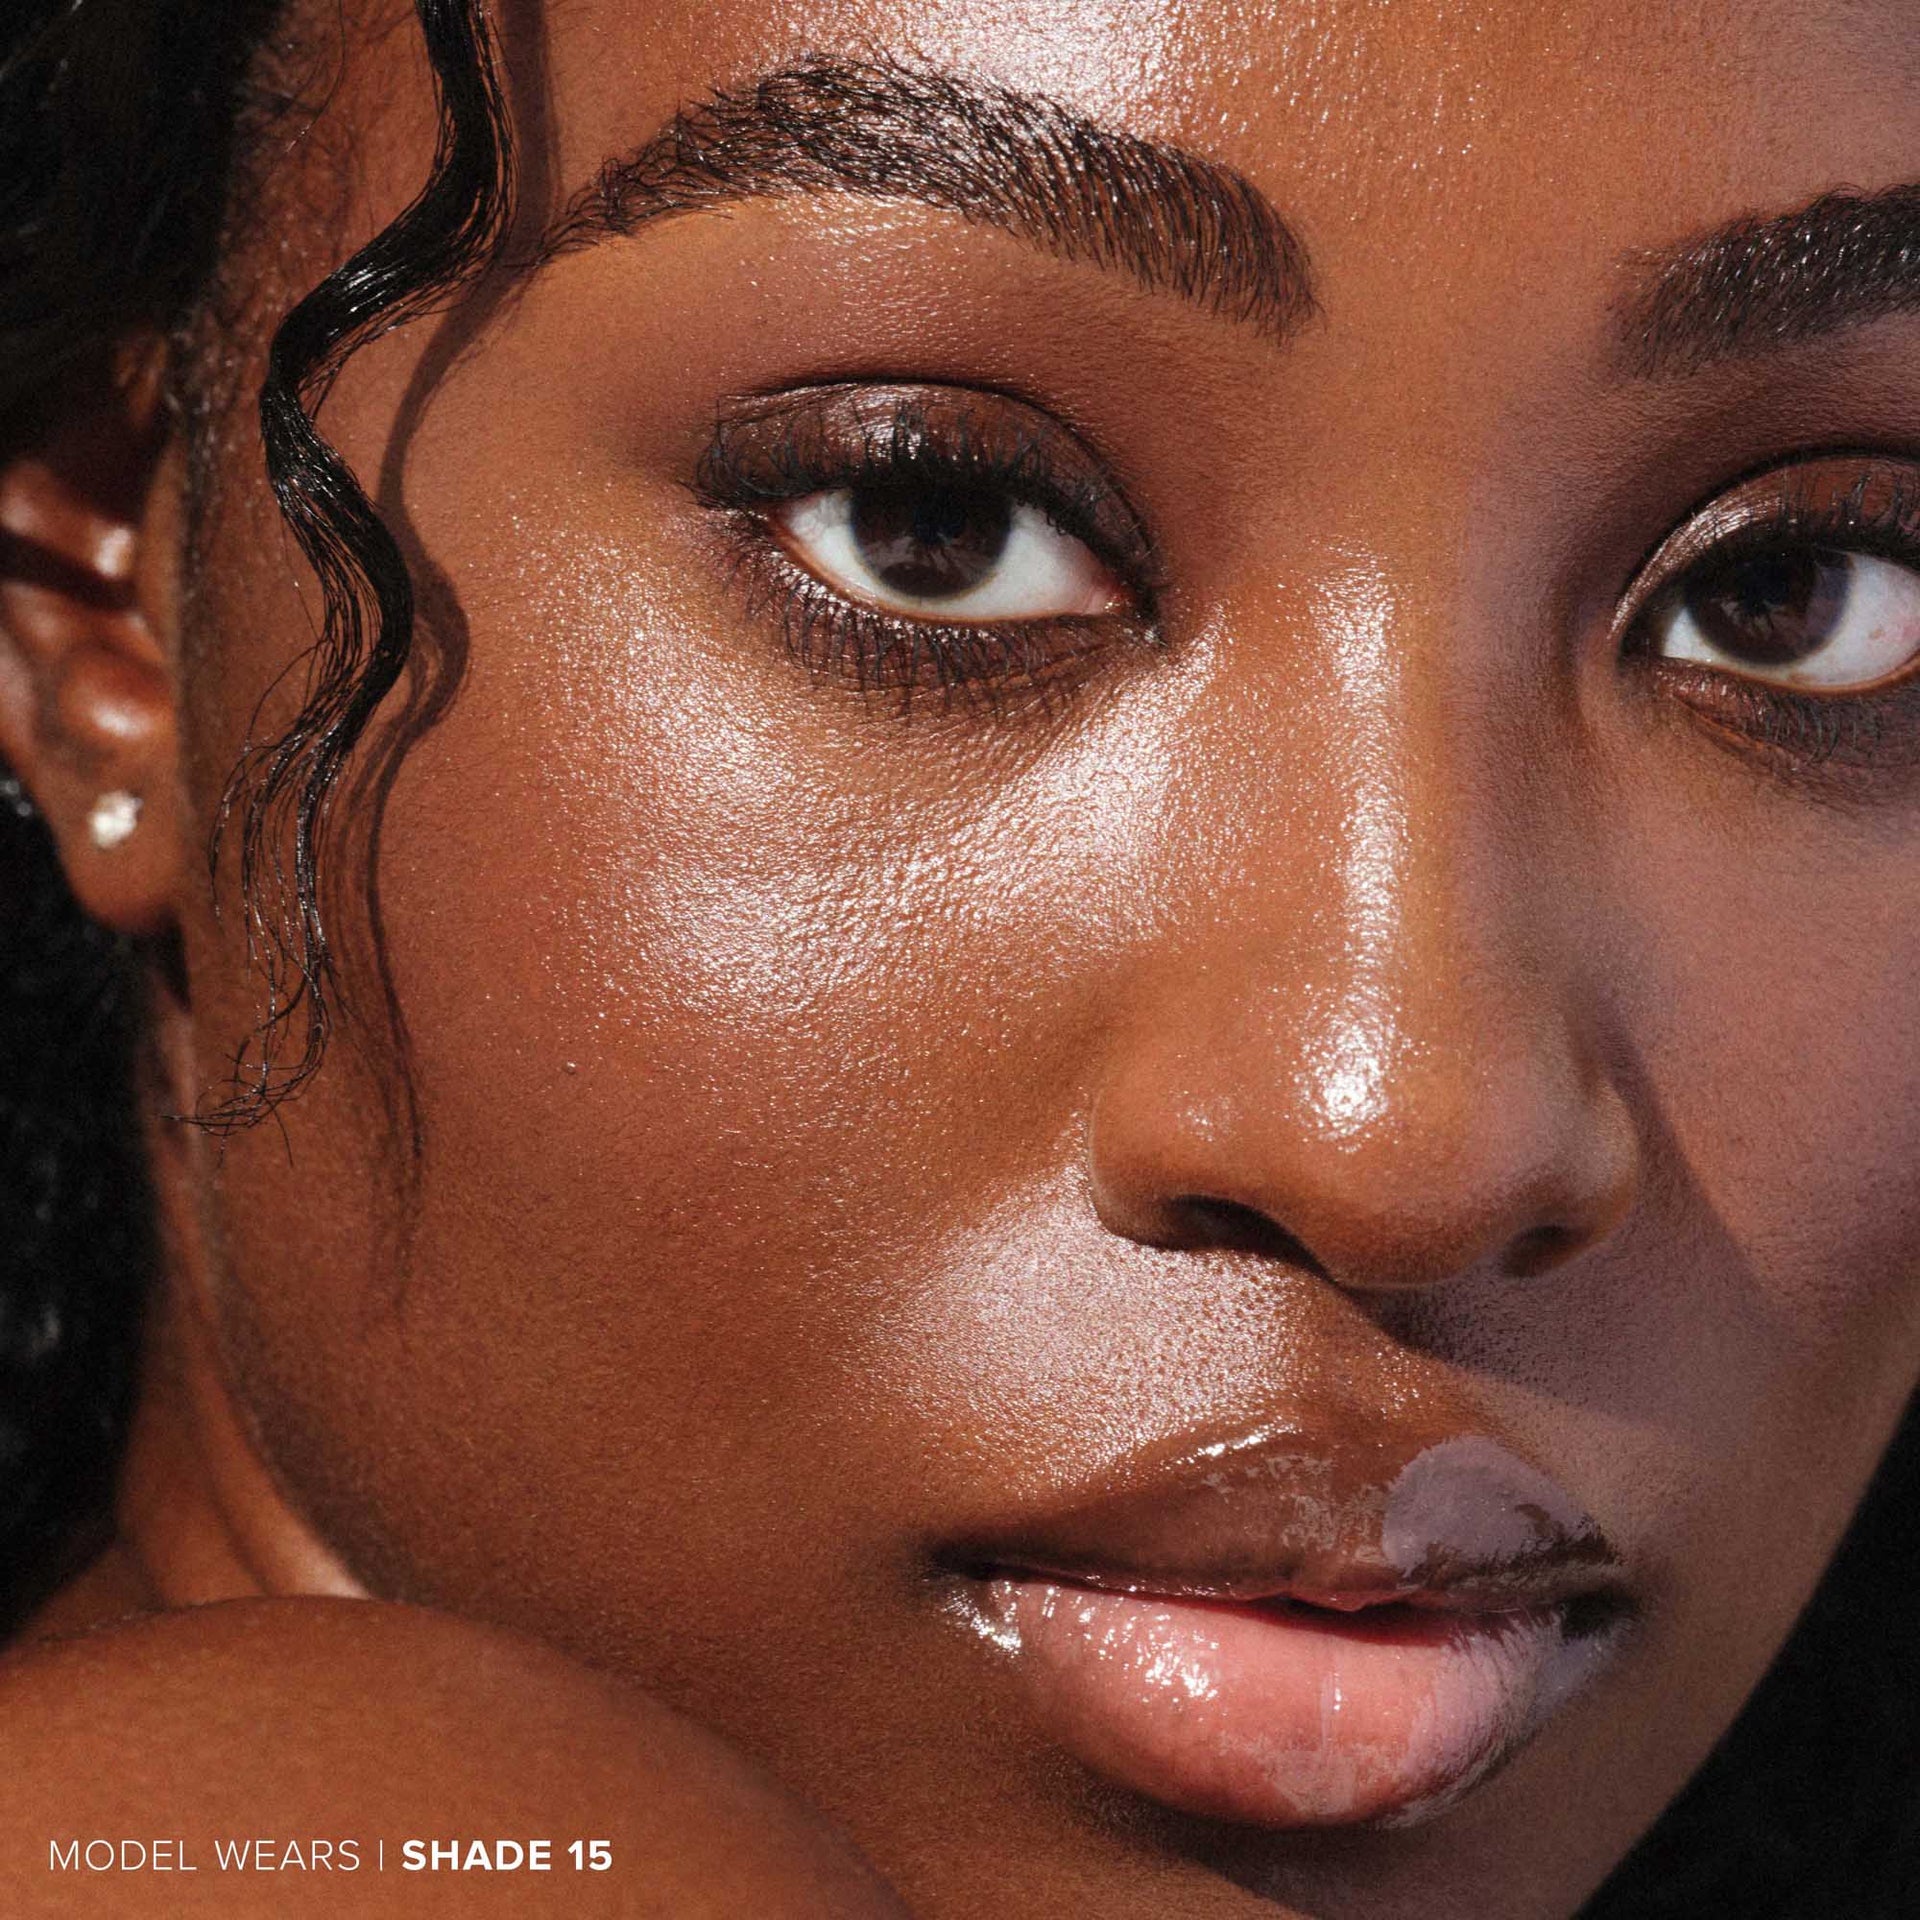 Shade 15 | Beauty Balm Serum Boosted Skin Tint On Model - Shade 15